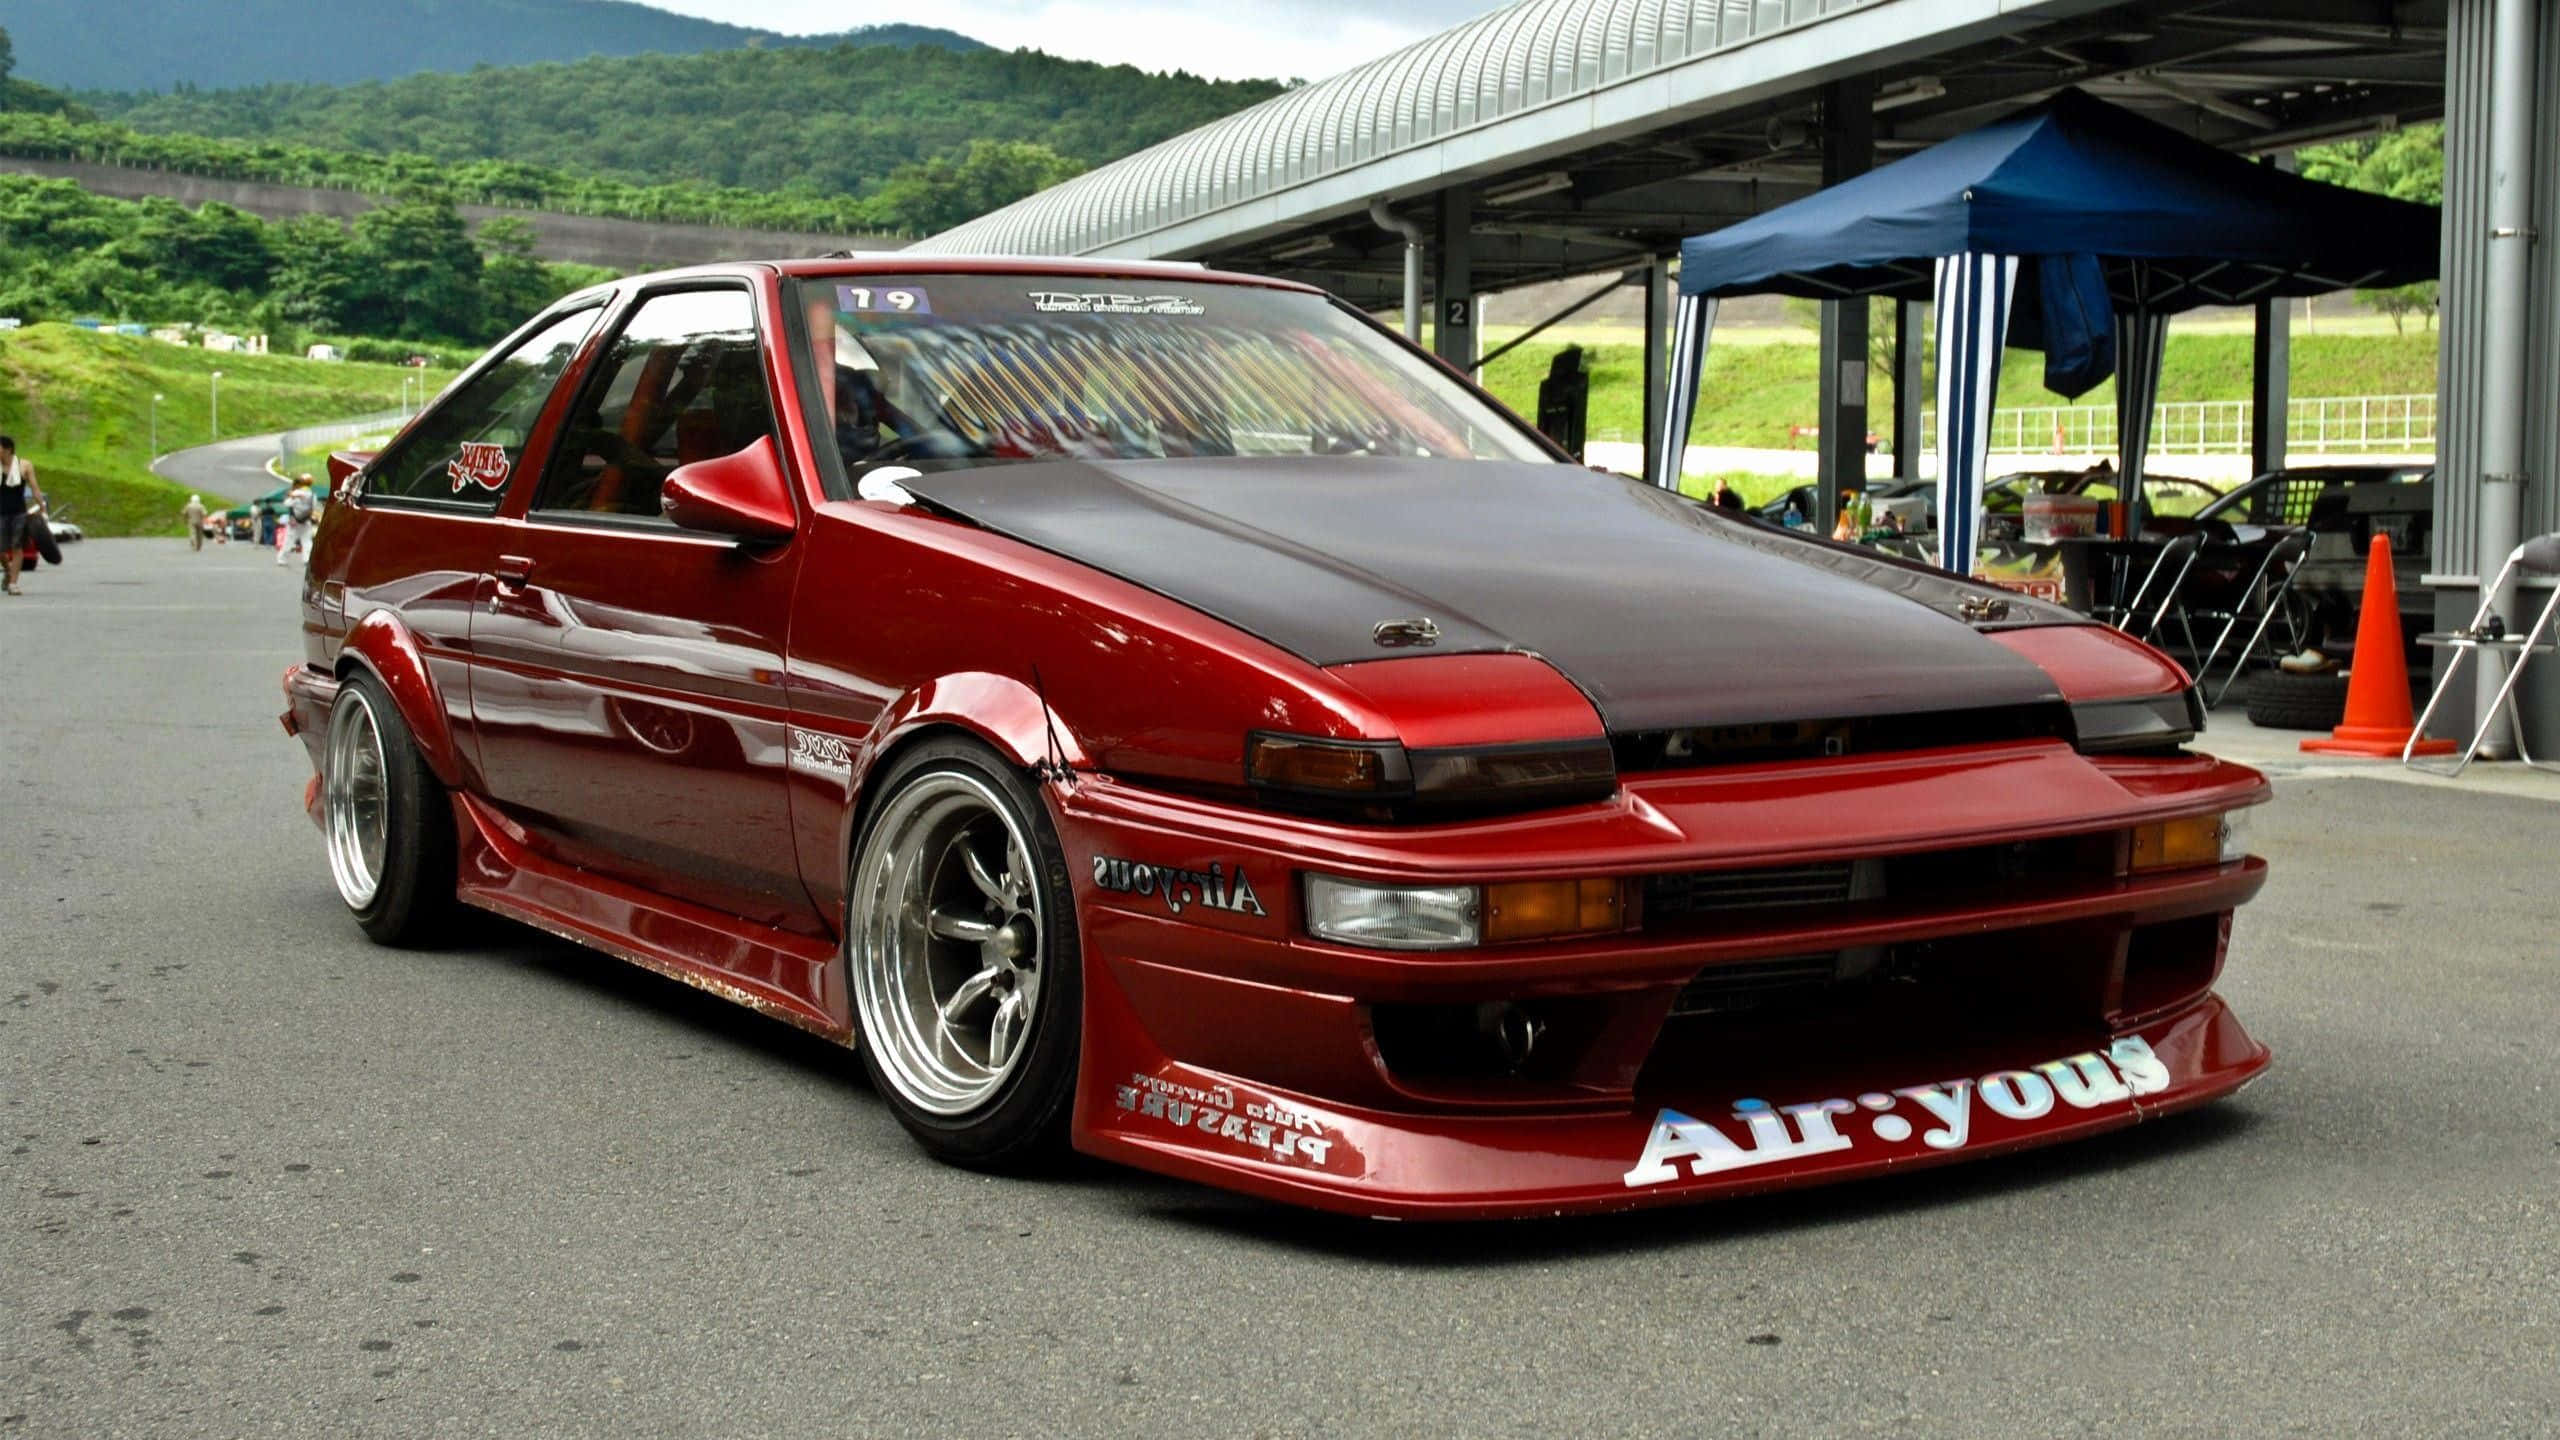 Unique JDM Style and Look